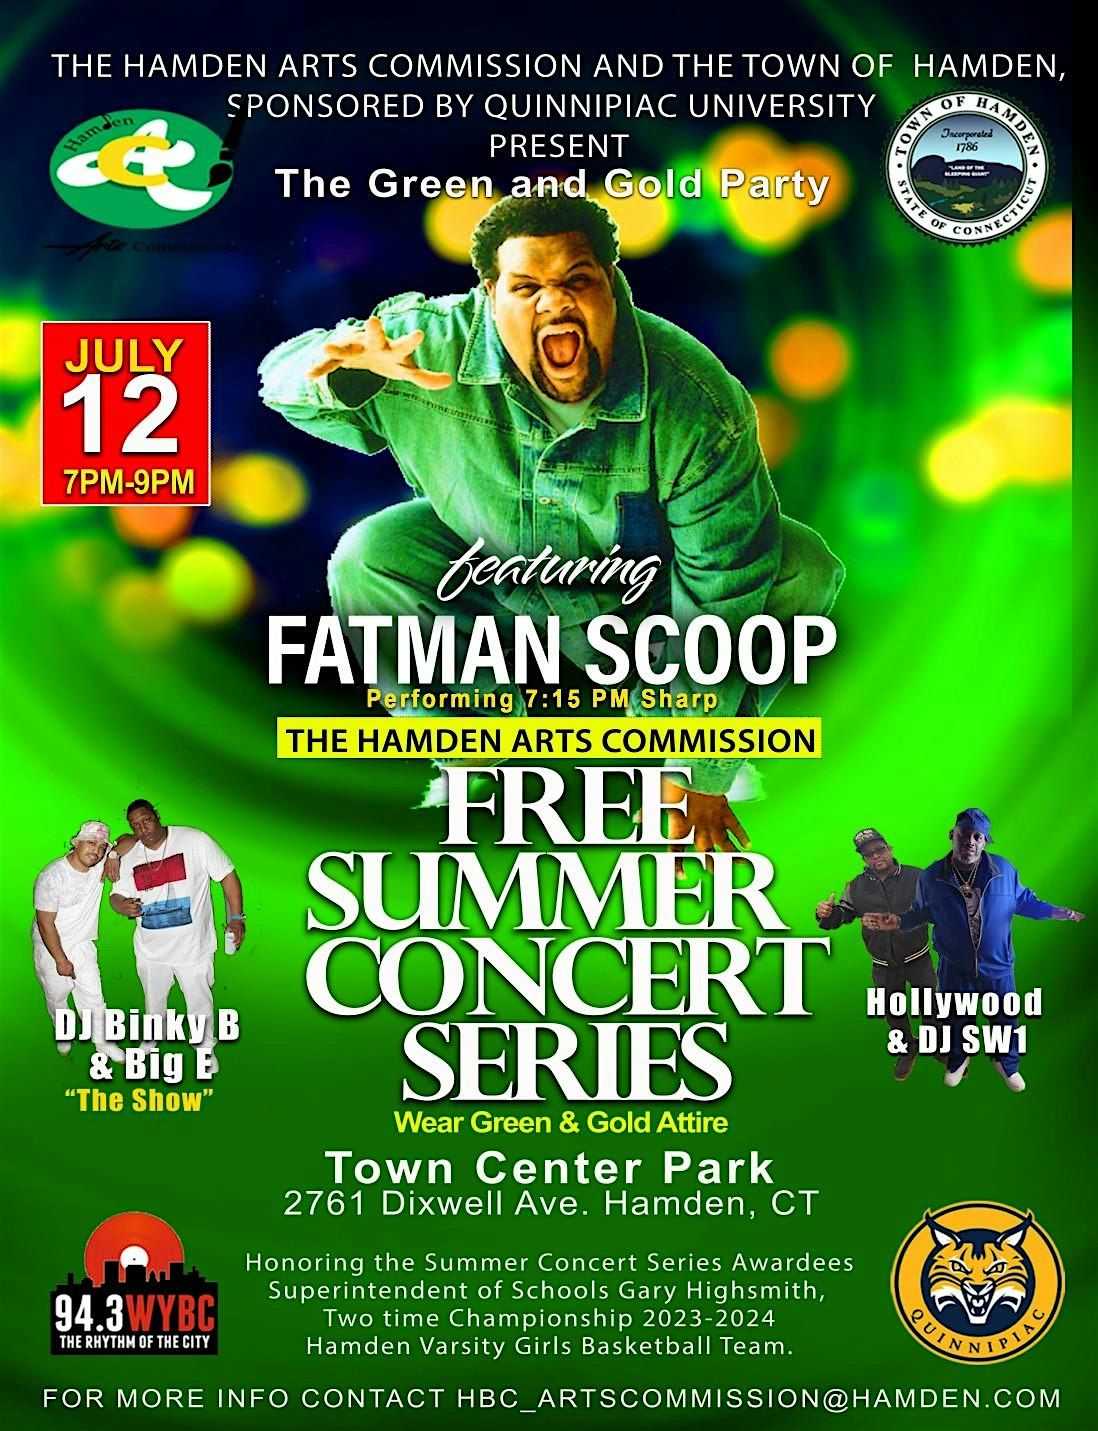 Green and Gold Party Featuring Fatman Scoop